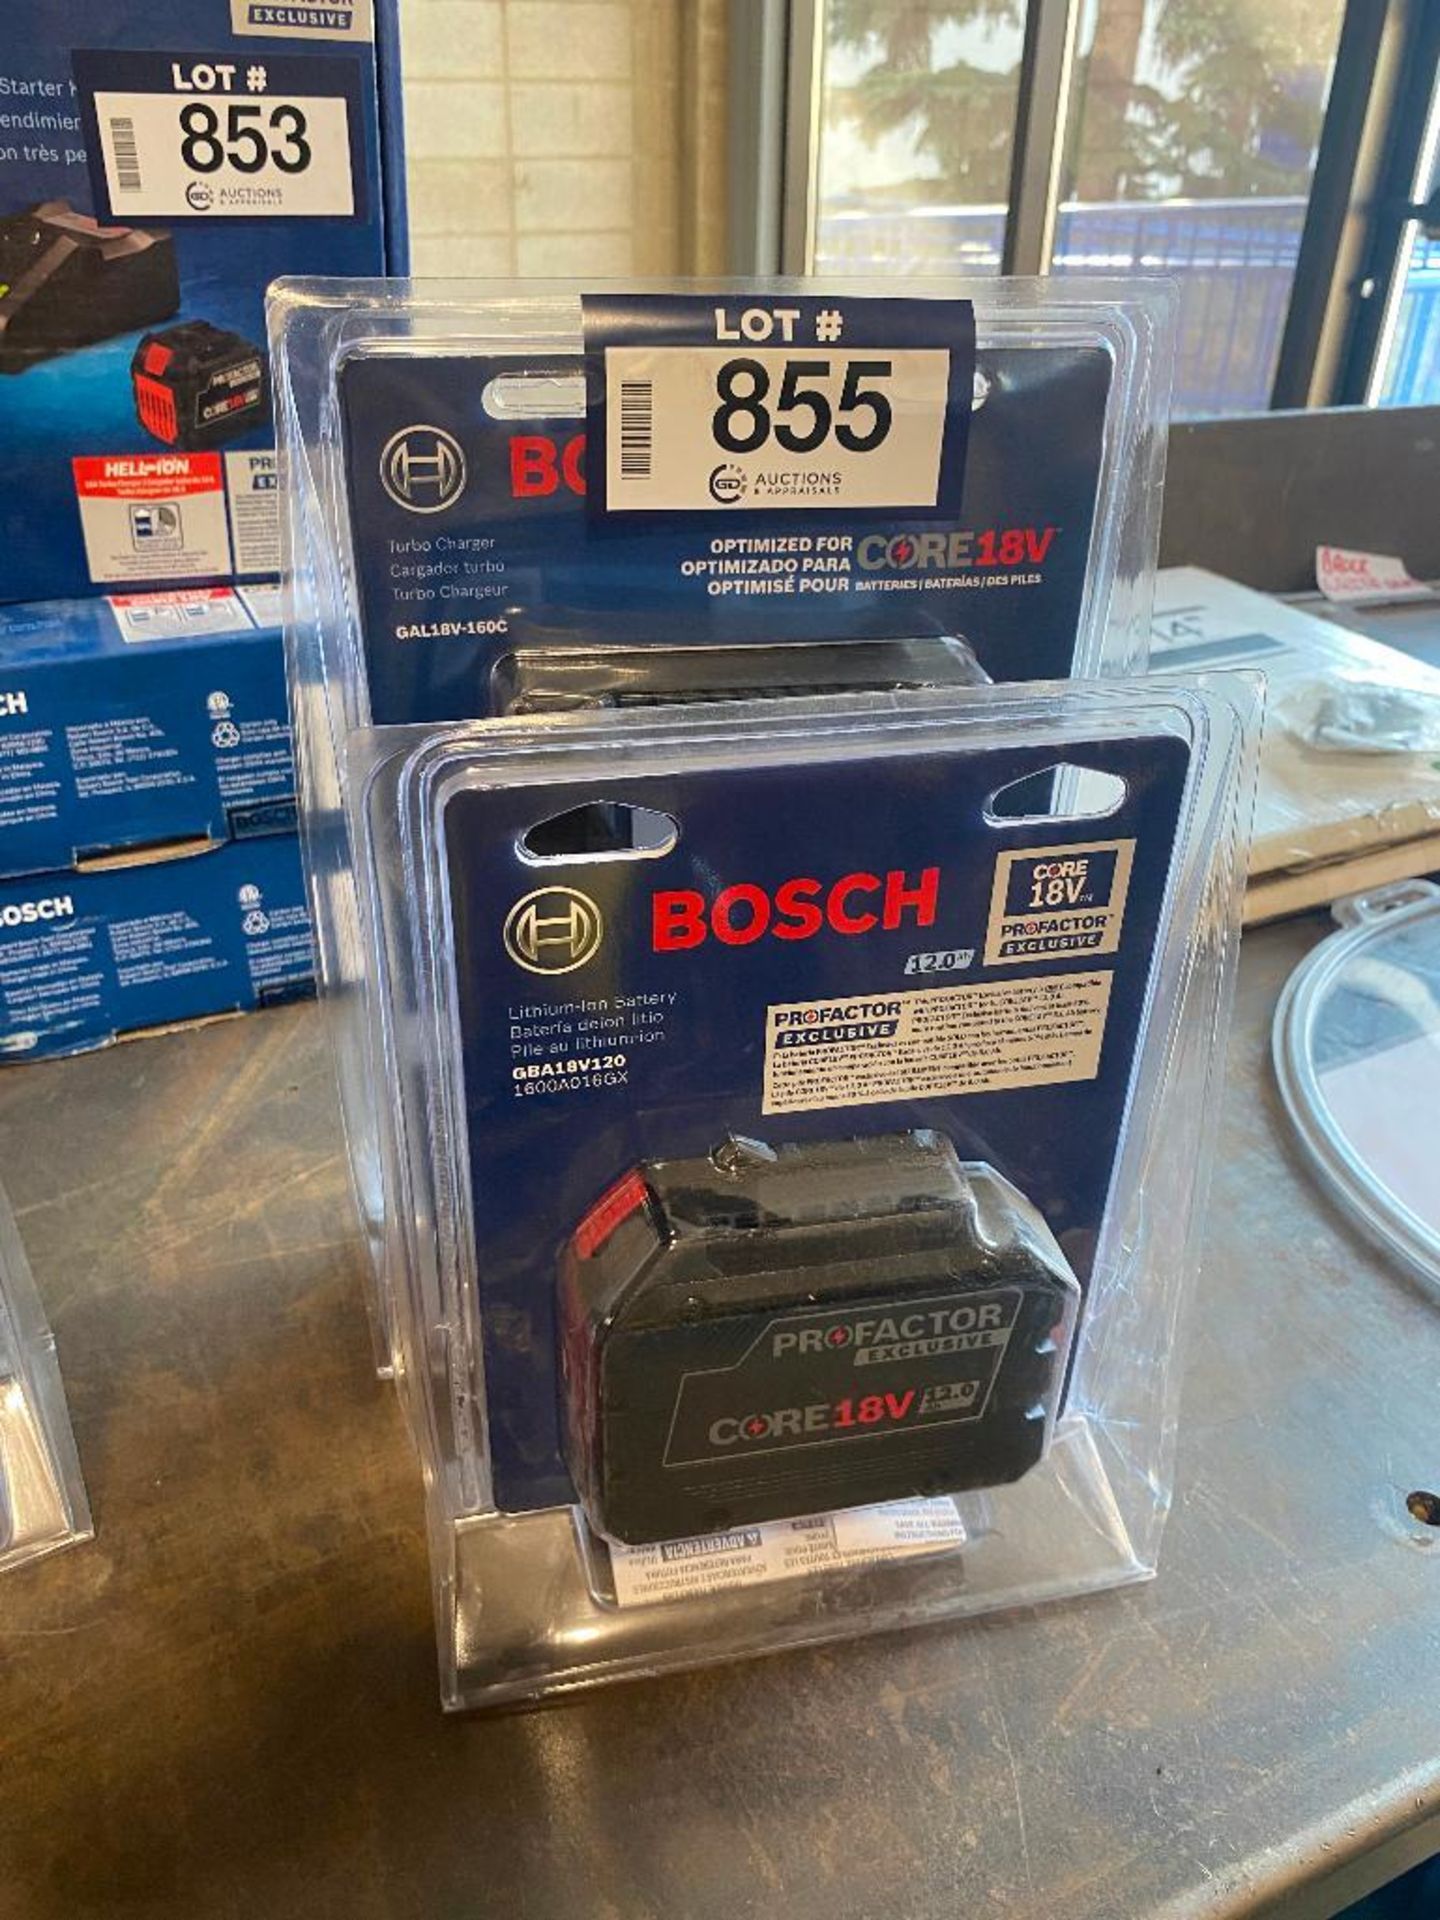 Lot of Bosch Turbo Charger and Bosch Lithium-Ion Battery